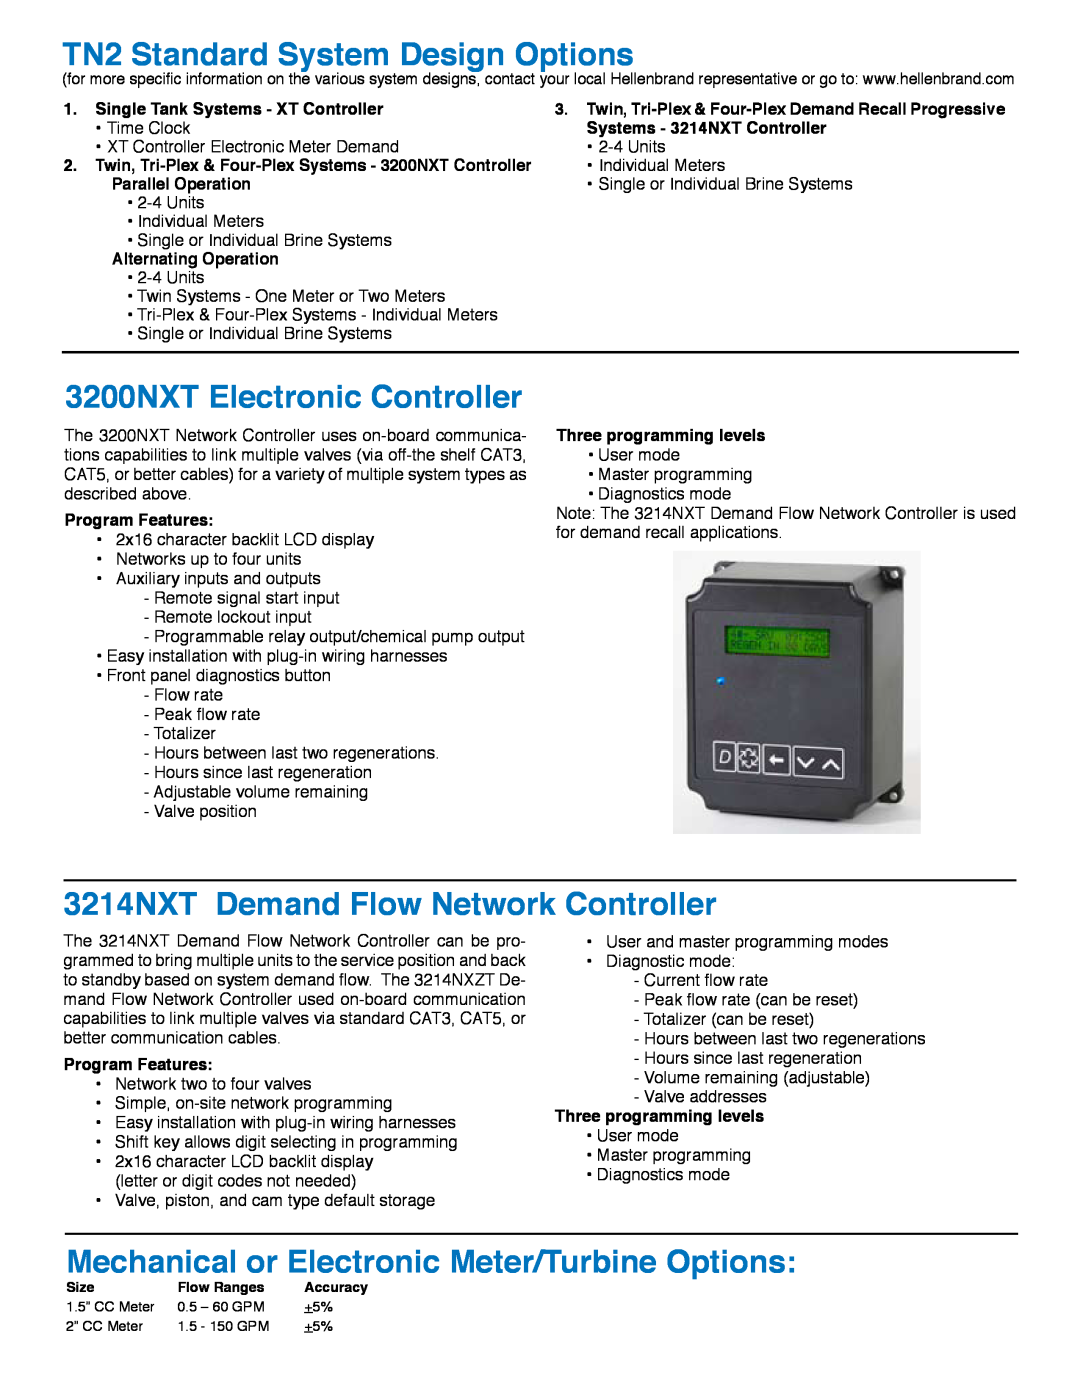 Hellenbrand TN2 Series TN2 Standard System Design Options, 3200NXT Electronic Controller, Systems - 3214NXT Controller 